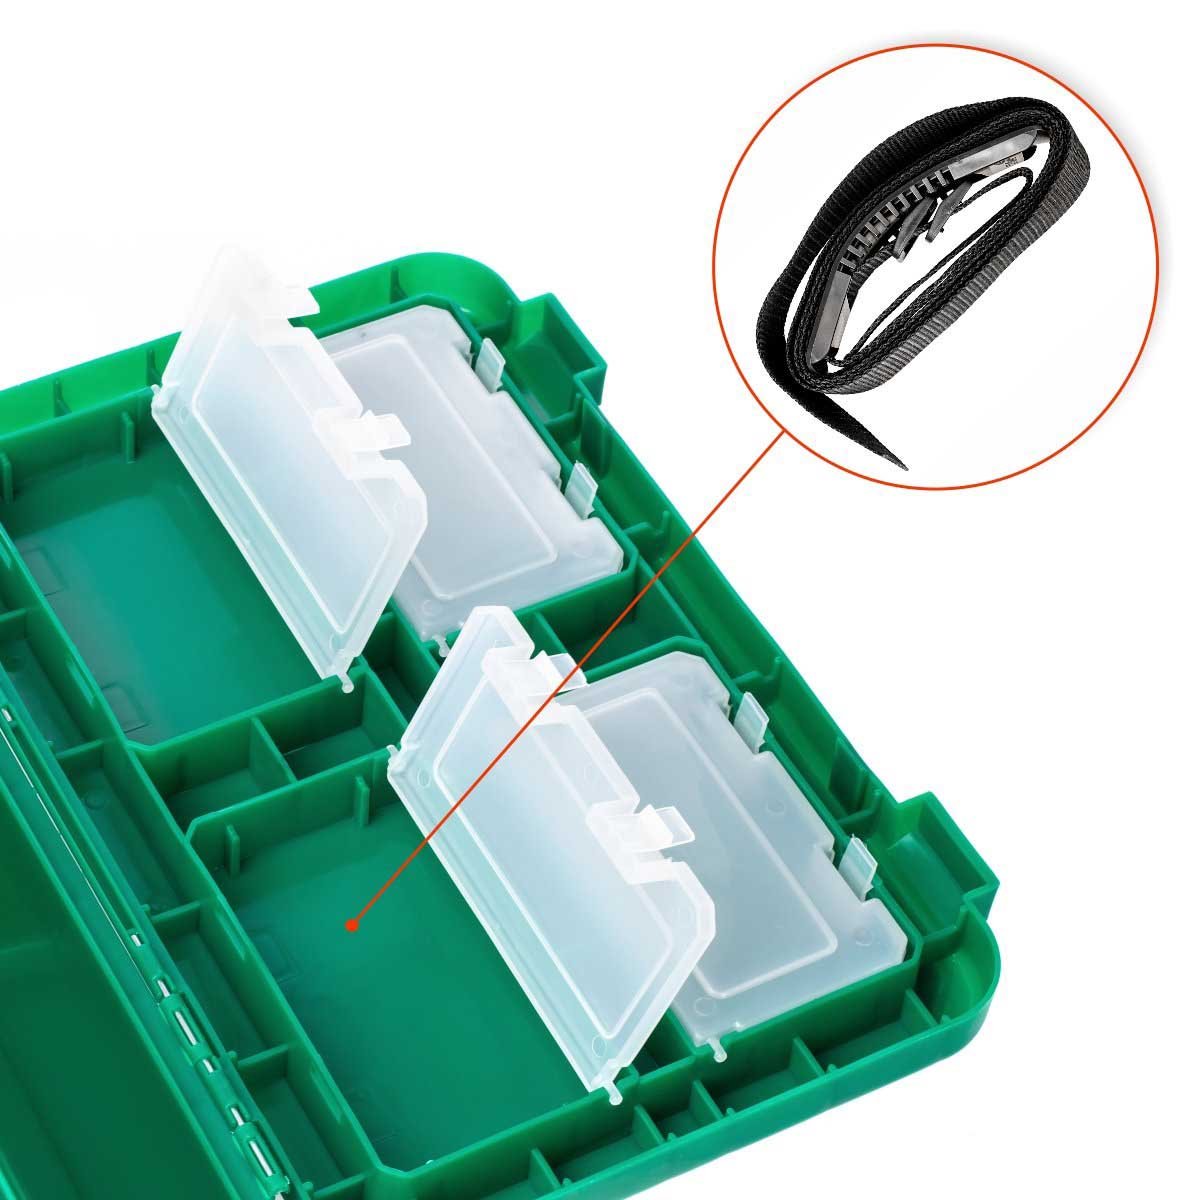 Ice Fishing Bucket Type Box with Seat is equipped with Adjustable Shoulder Strap